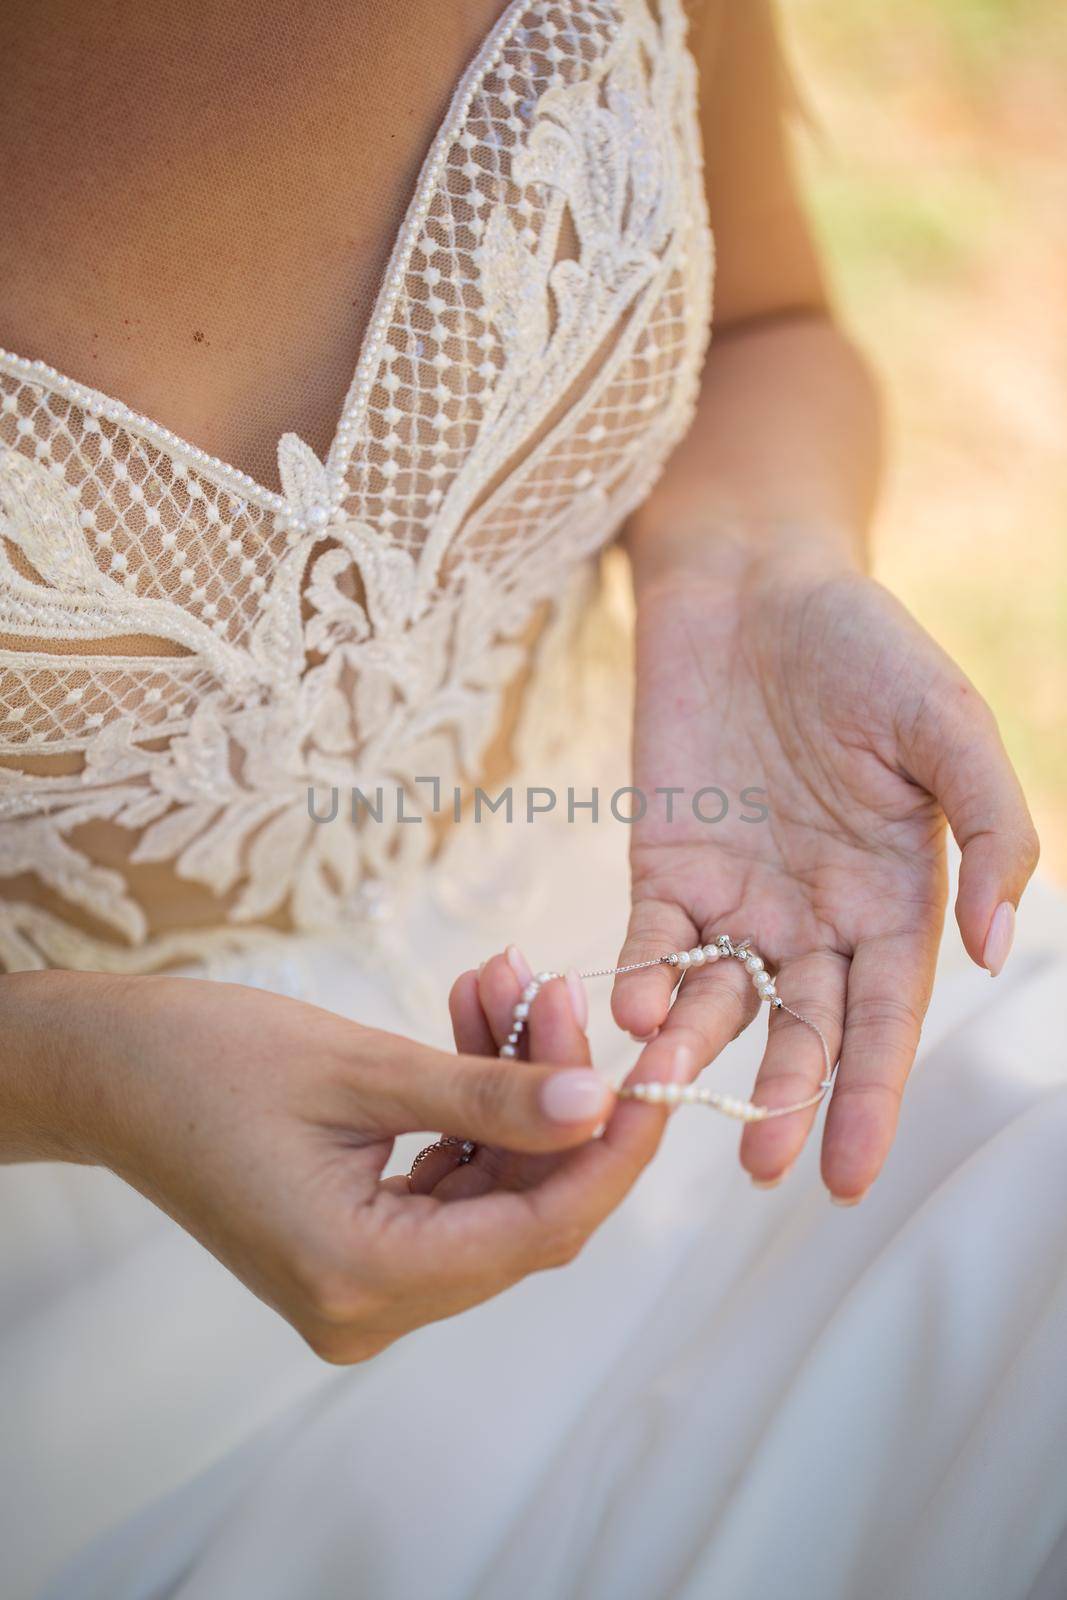 The bride holds a foot ornament in her hands. by StudioPeace